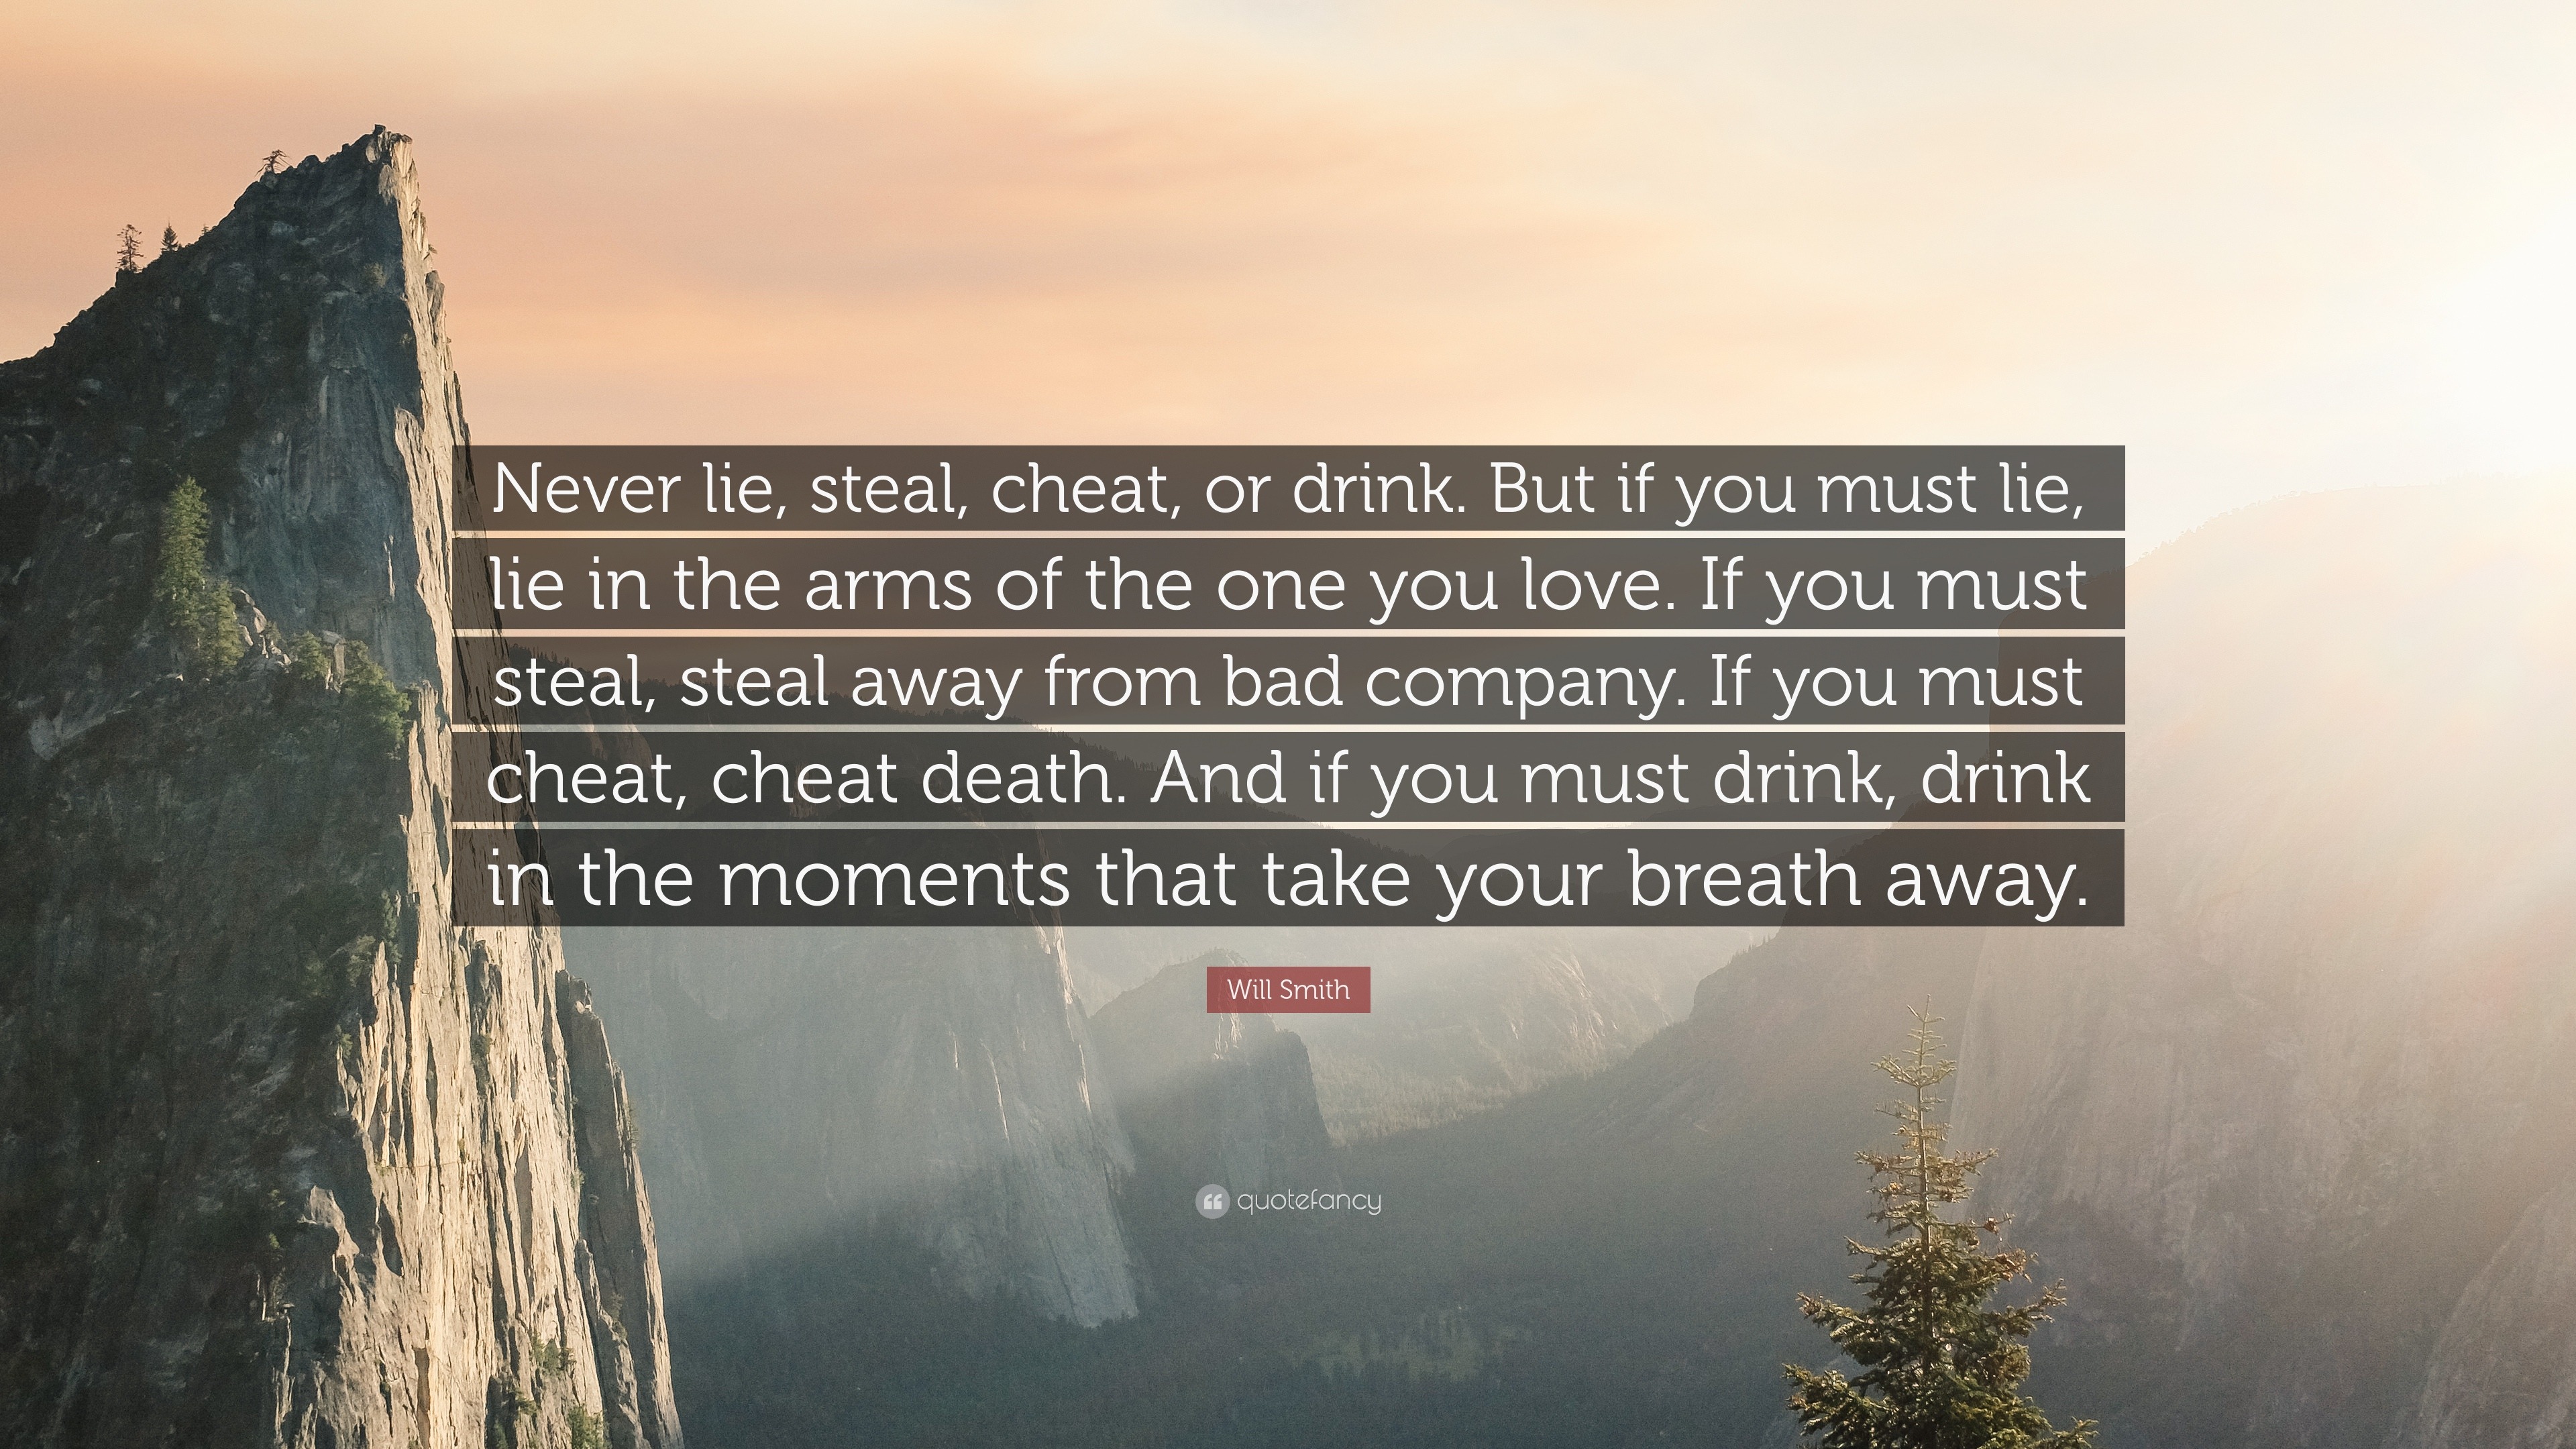 Will Smith Quote “Never lie steal cheat or drink But